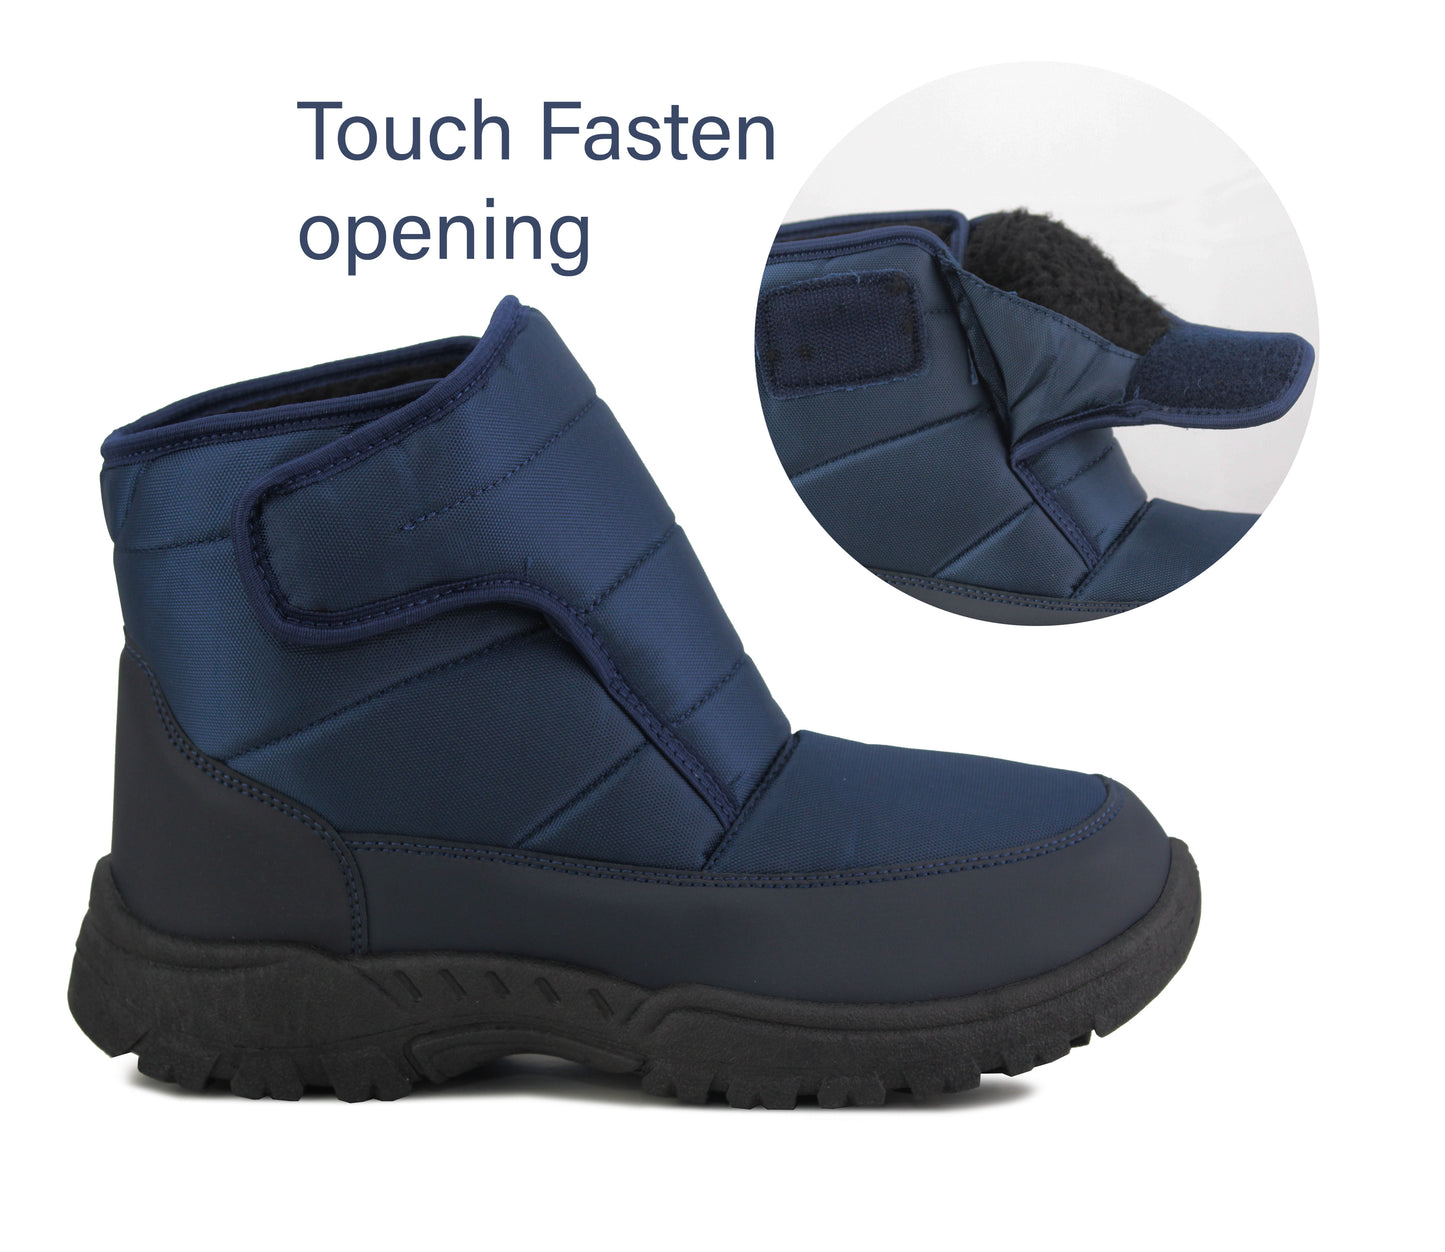 CW82 Mens Thermal Fleece Lined Ankle Boots in Navy